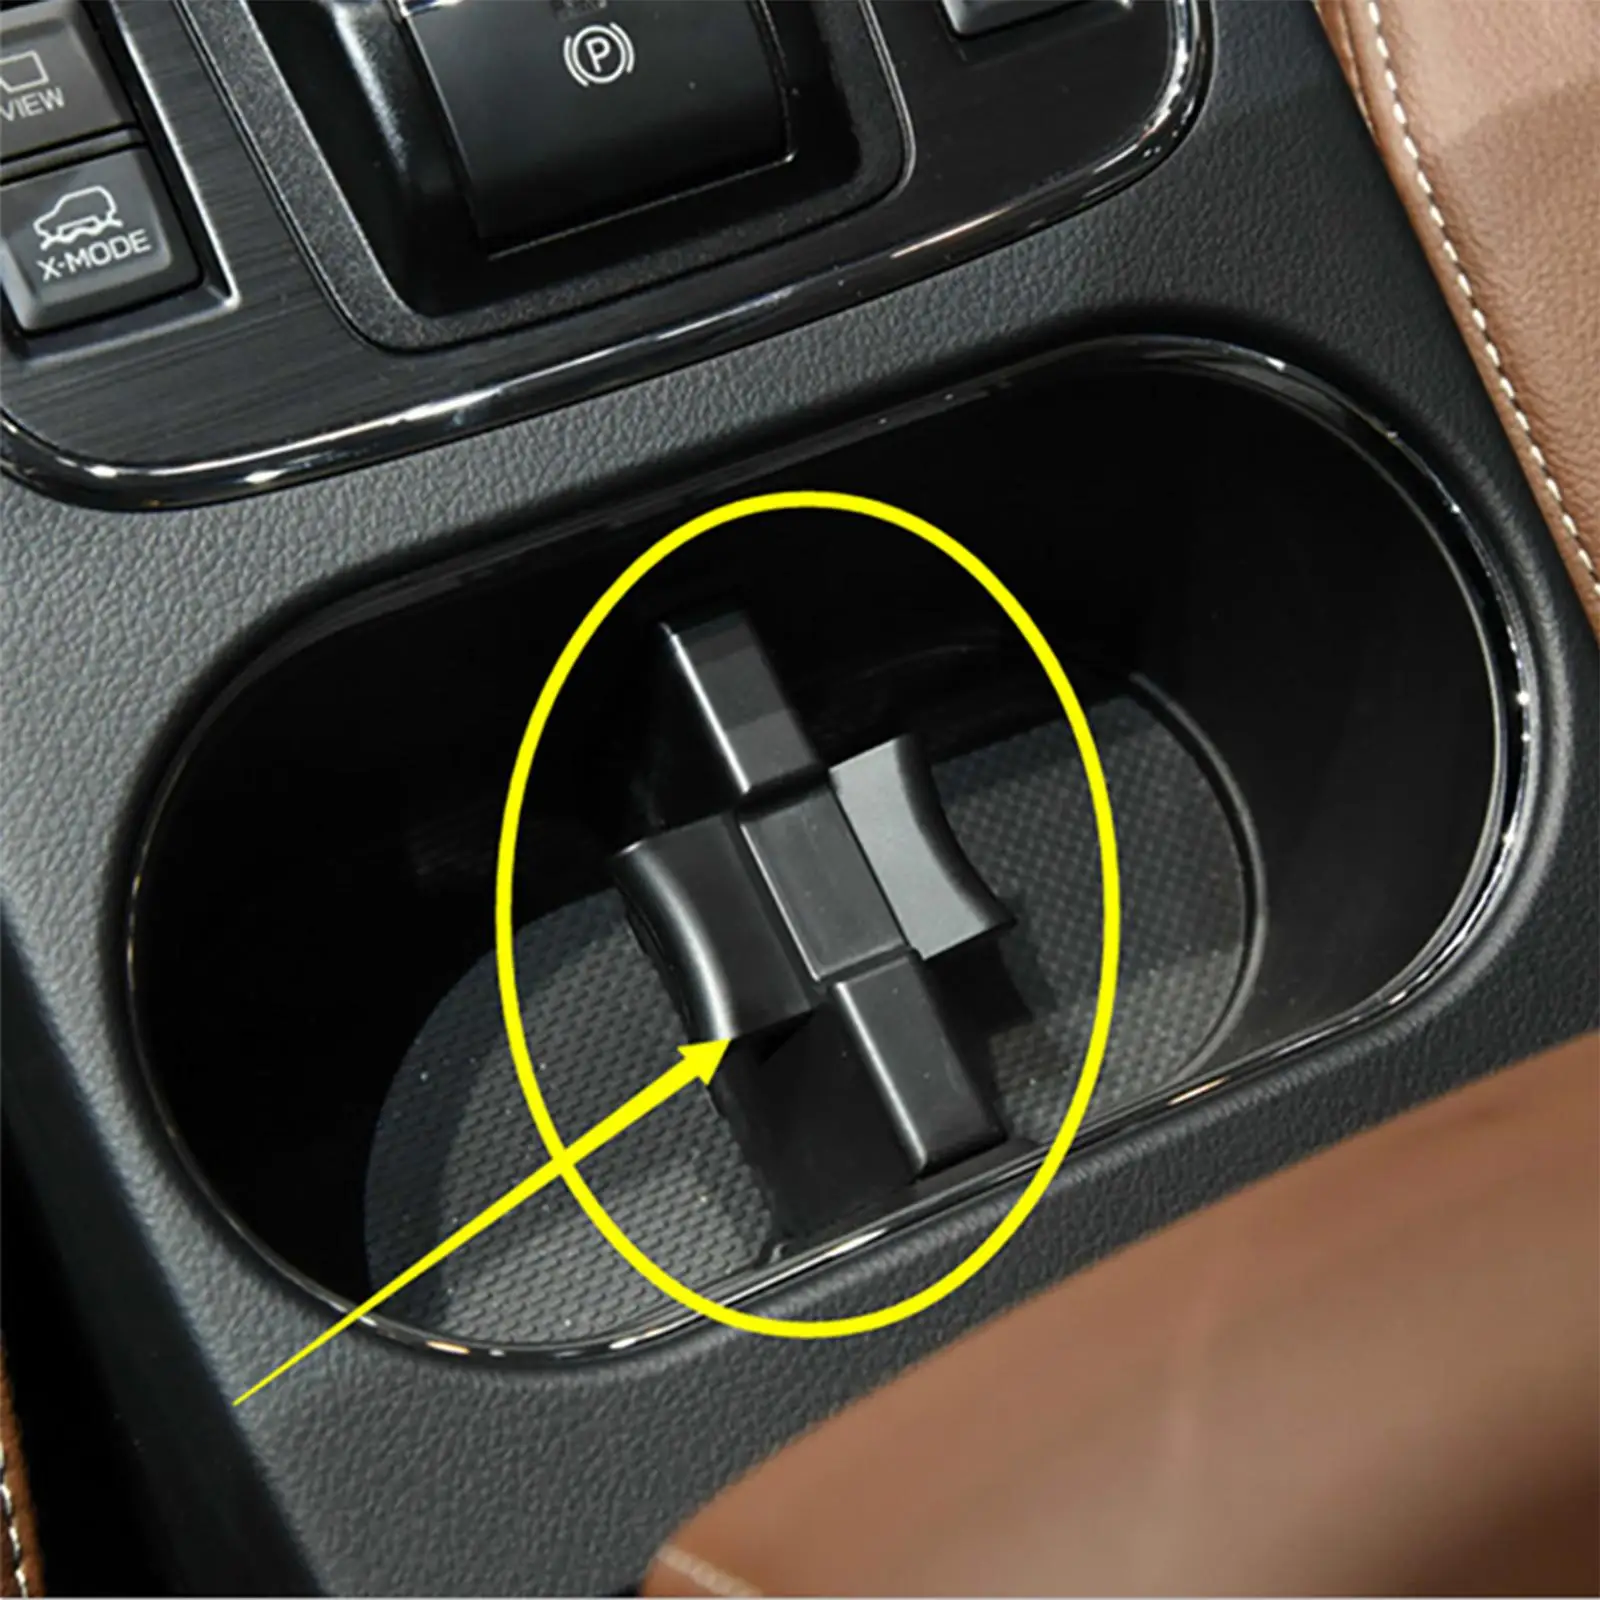 92118Aj000 Replaces Cup Holder Divider for Subaru Outback 2014-2020.